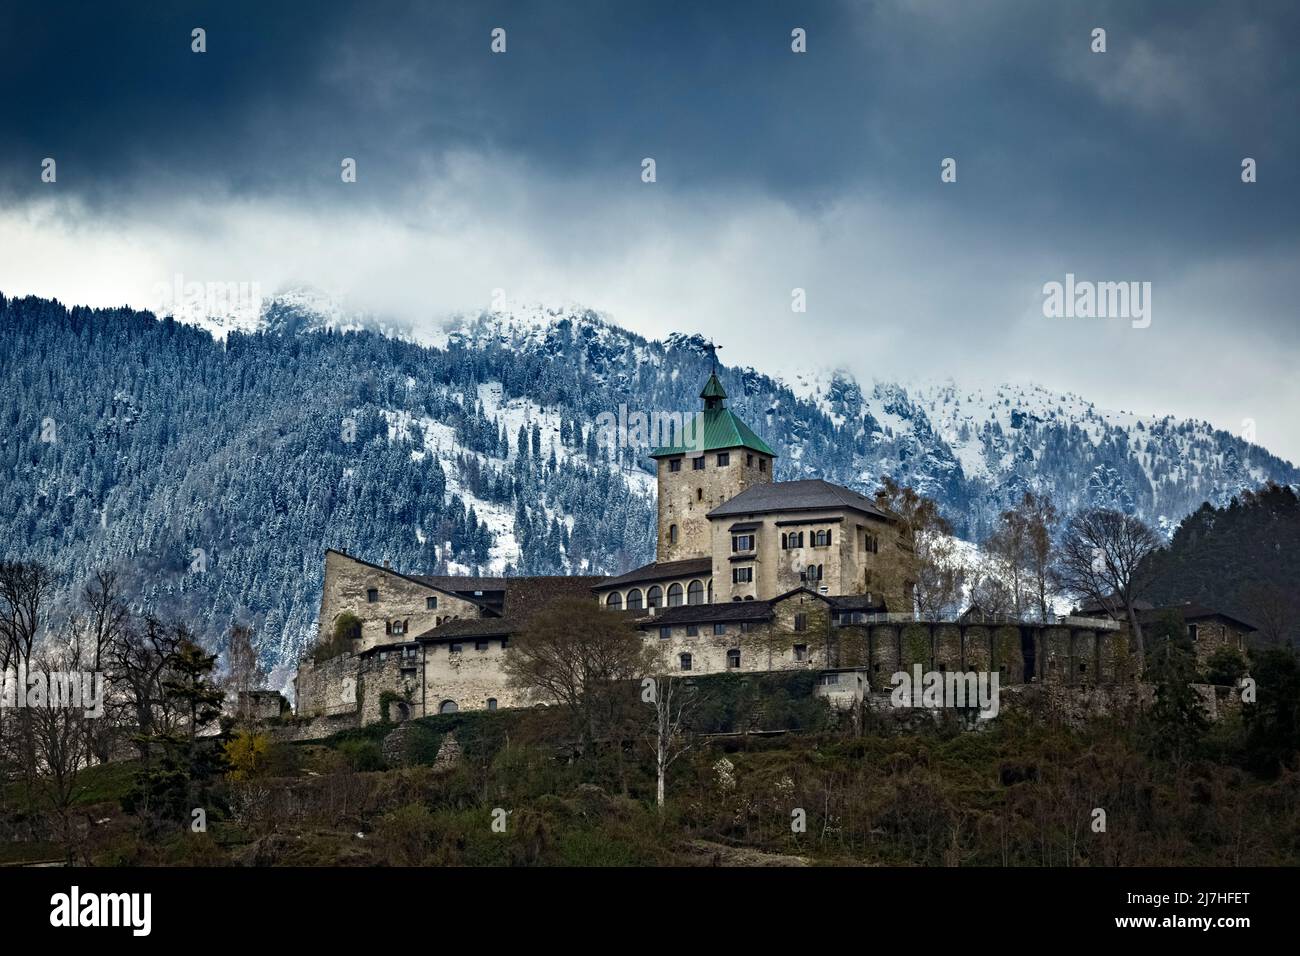 The imposing fortified structure of Ivano castle stands out among the Valsugana mountains. Castel Ivano, Trento province, Trentino Alto-Adige, Italy. Stock Photo